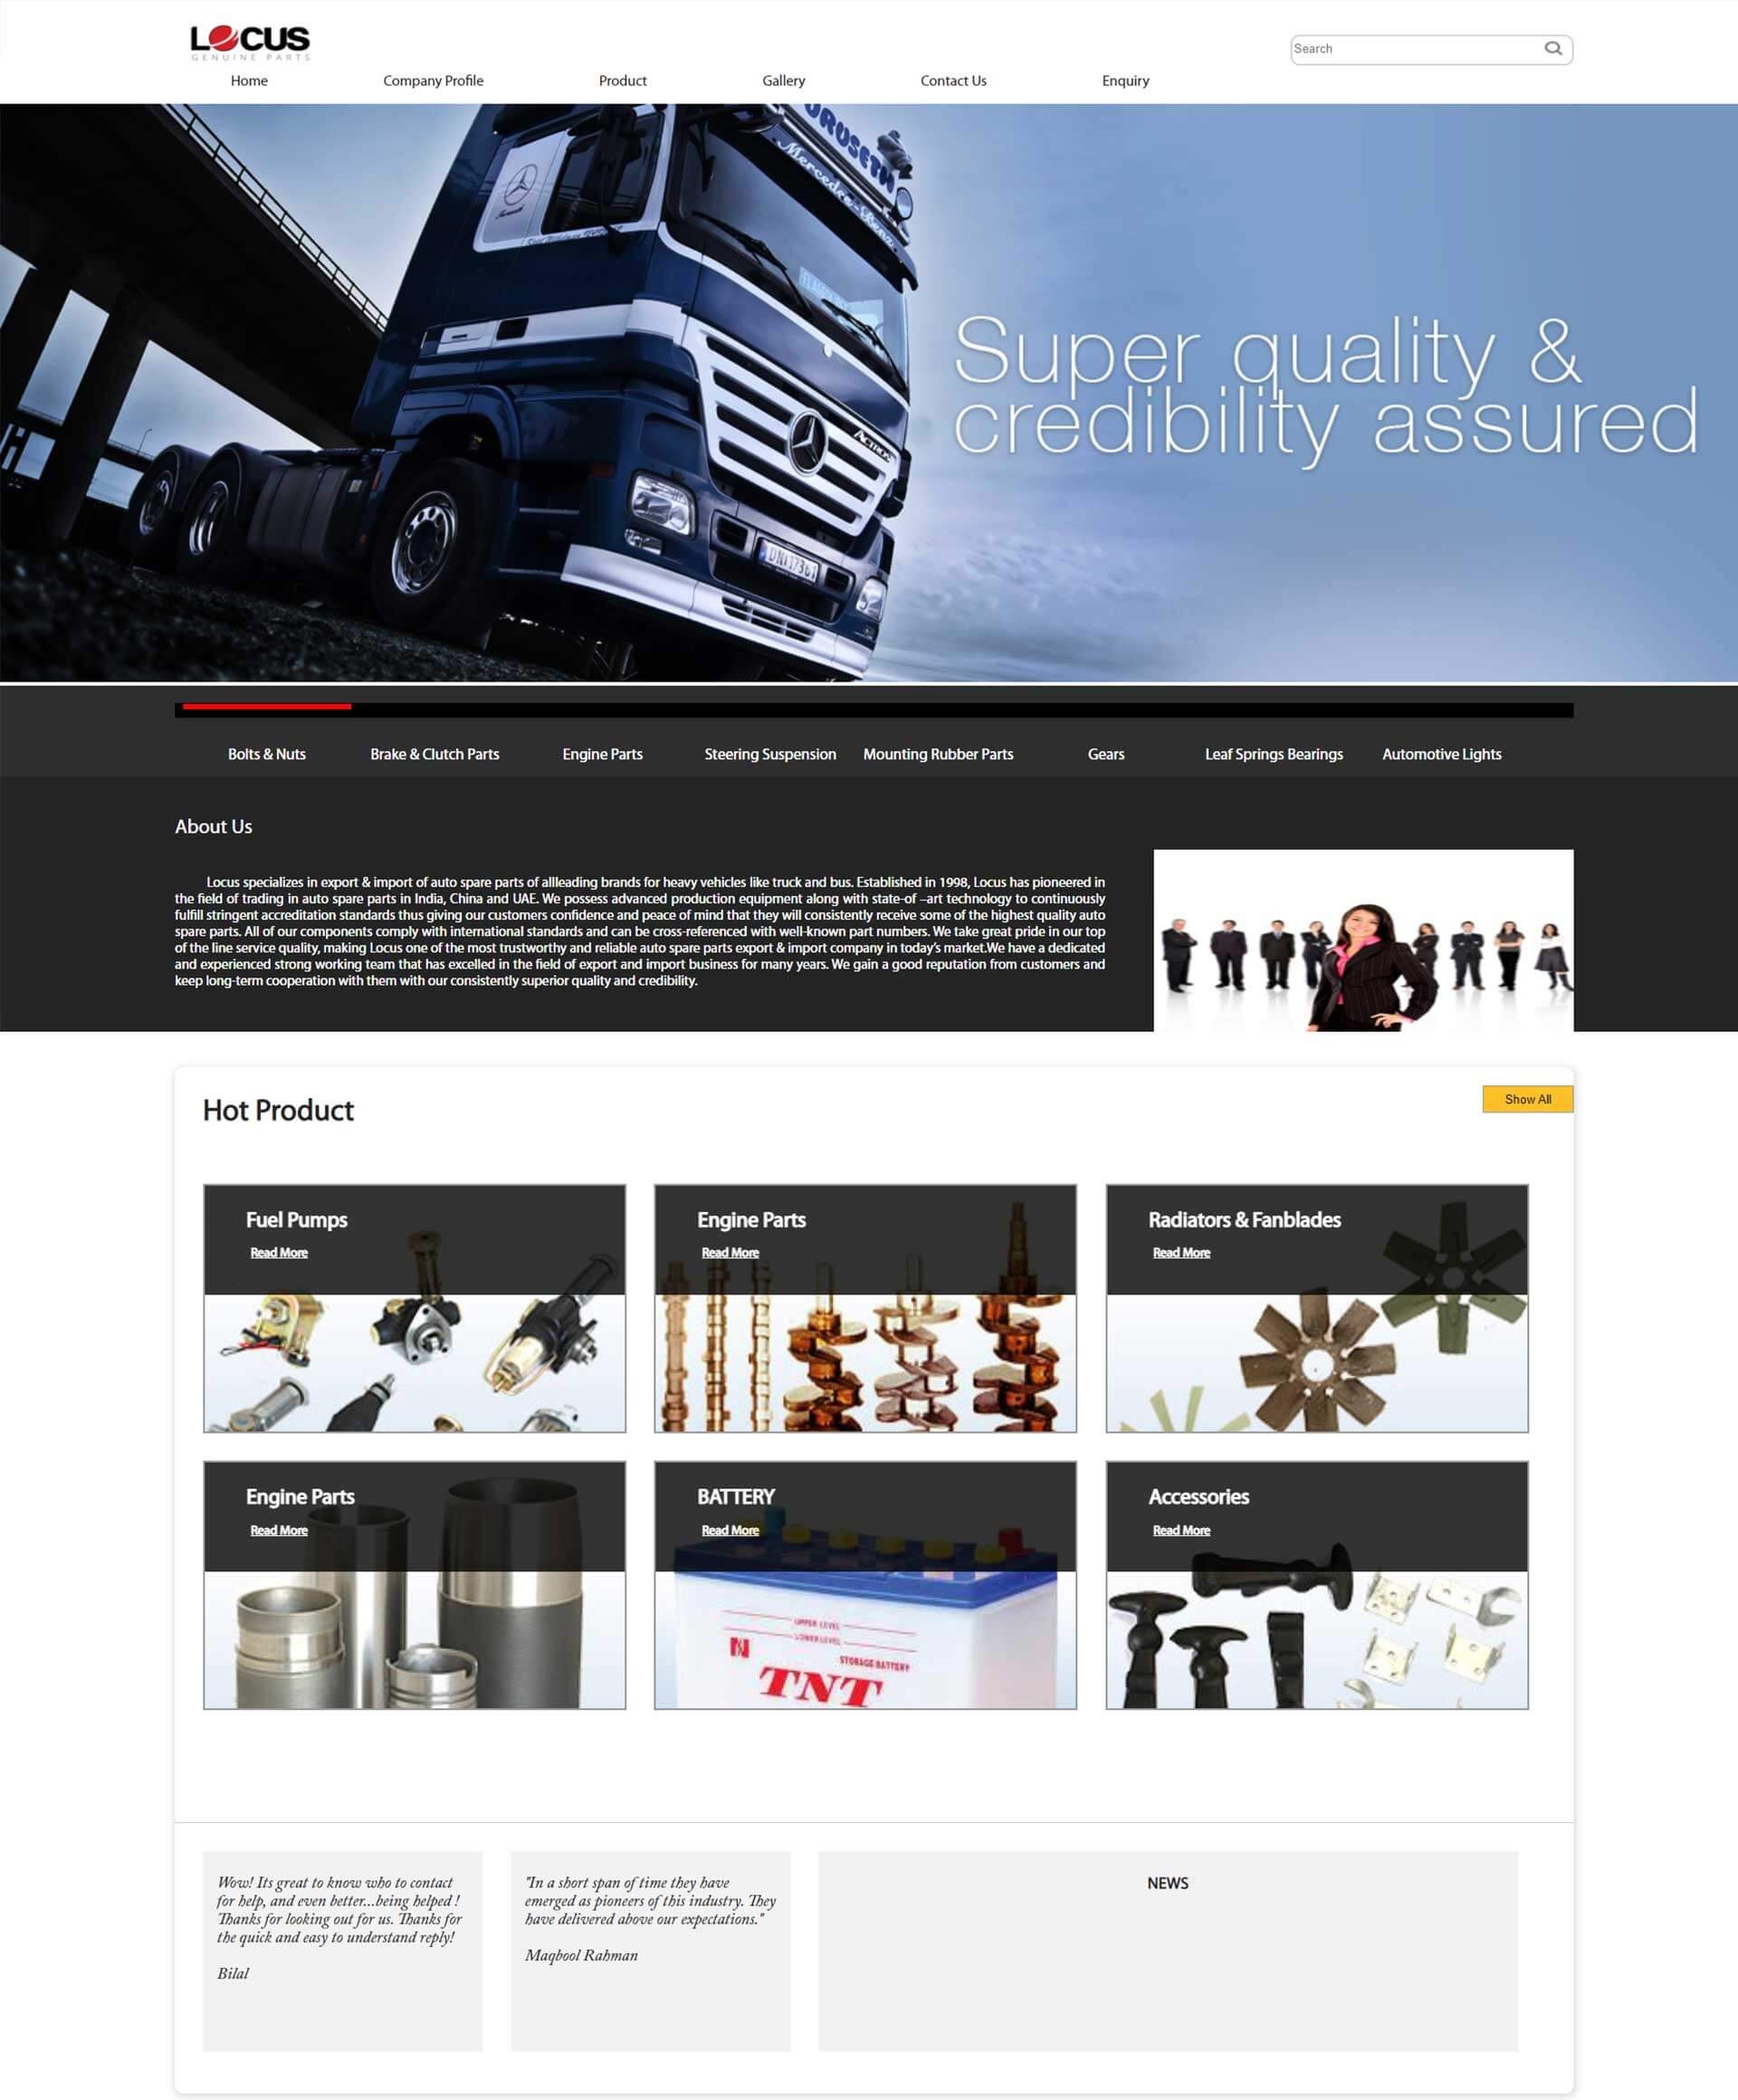 Website developed for Locus Exports,Automobile Spare Parts dealers in Kerala